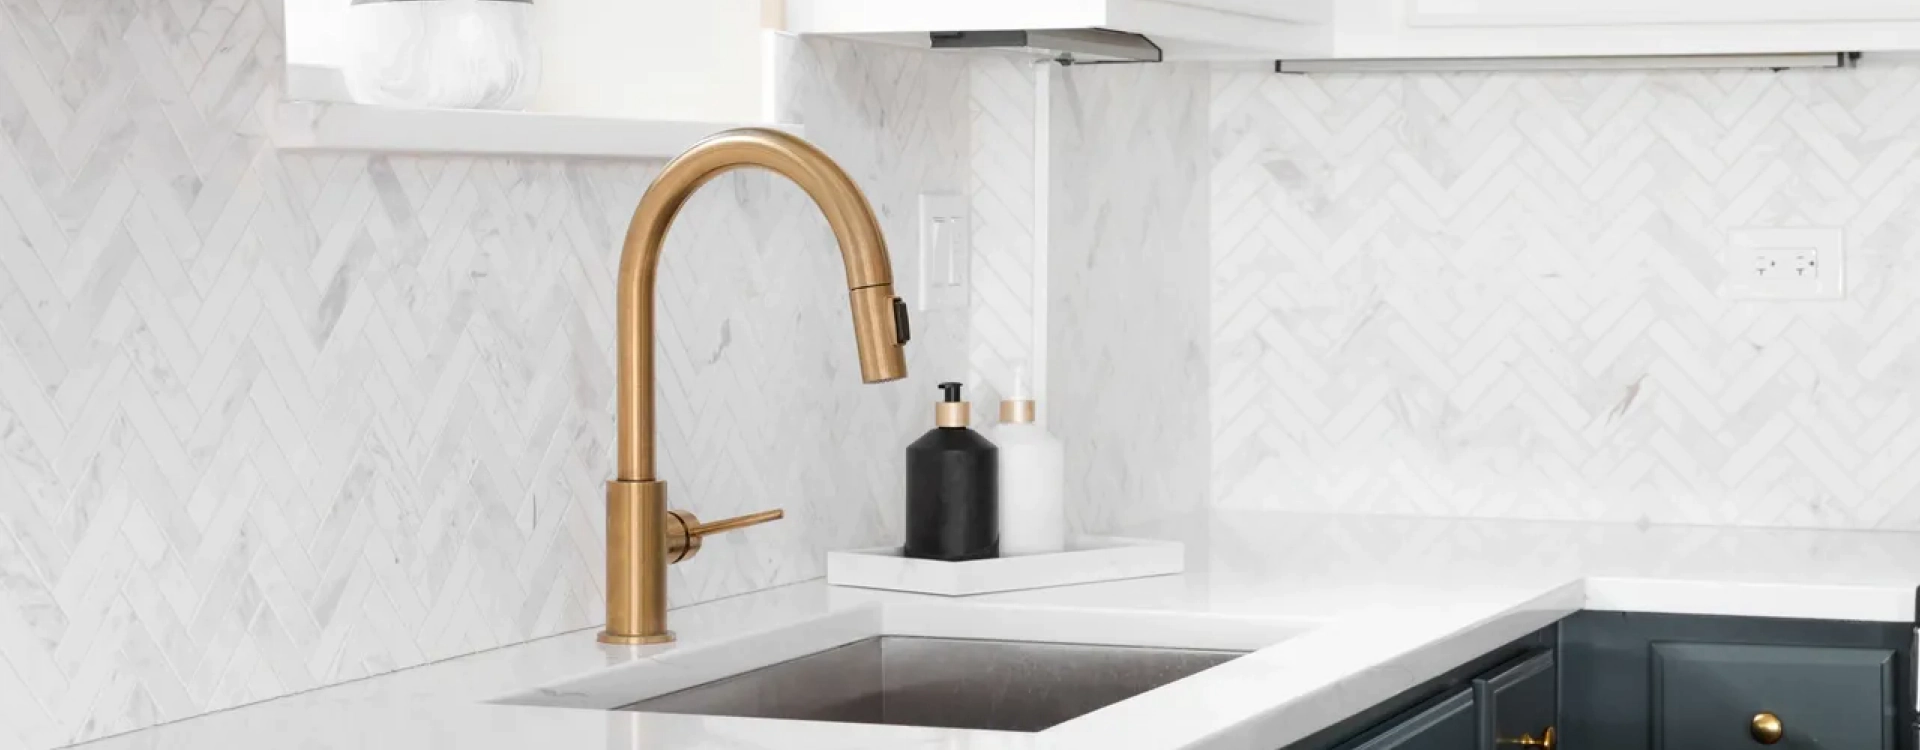 white kitchen sink with a golden faucet